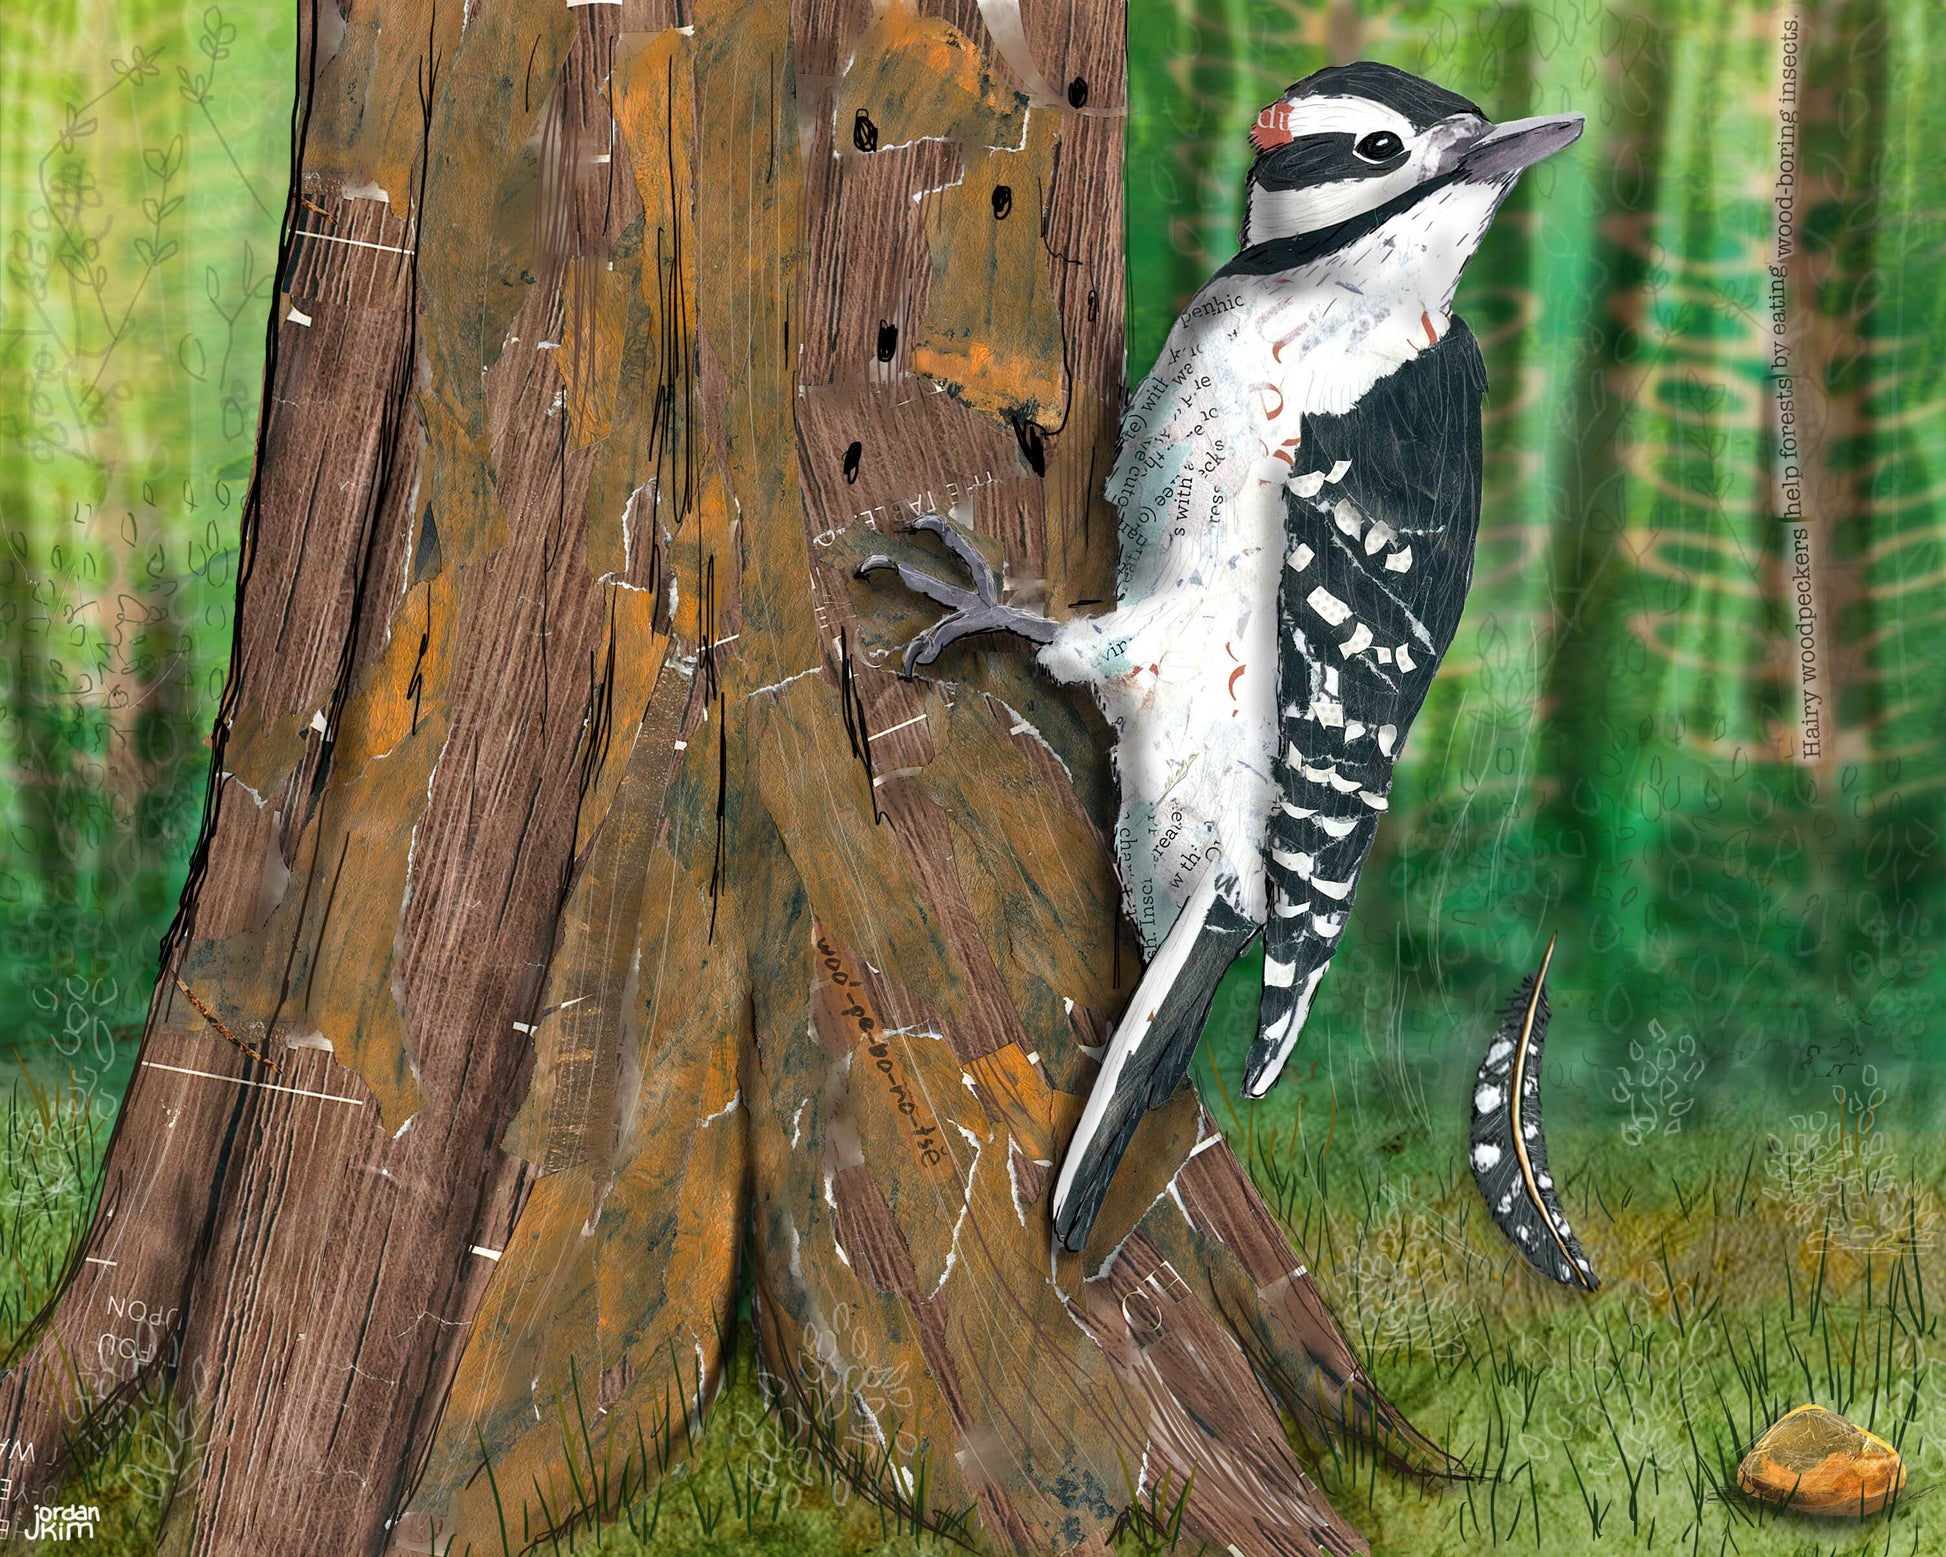 Greeting Card of mixed media collage of a hairy woodpecker hanging on a tree, Yellowstone - Blank Inside